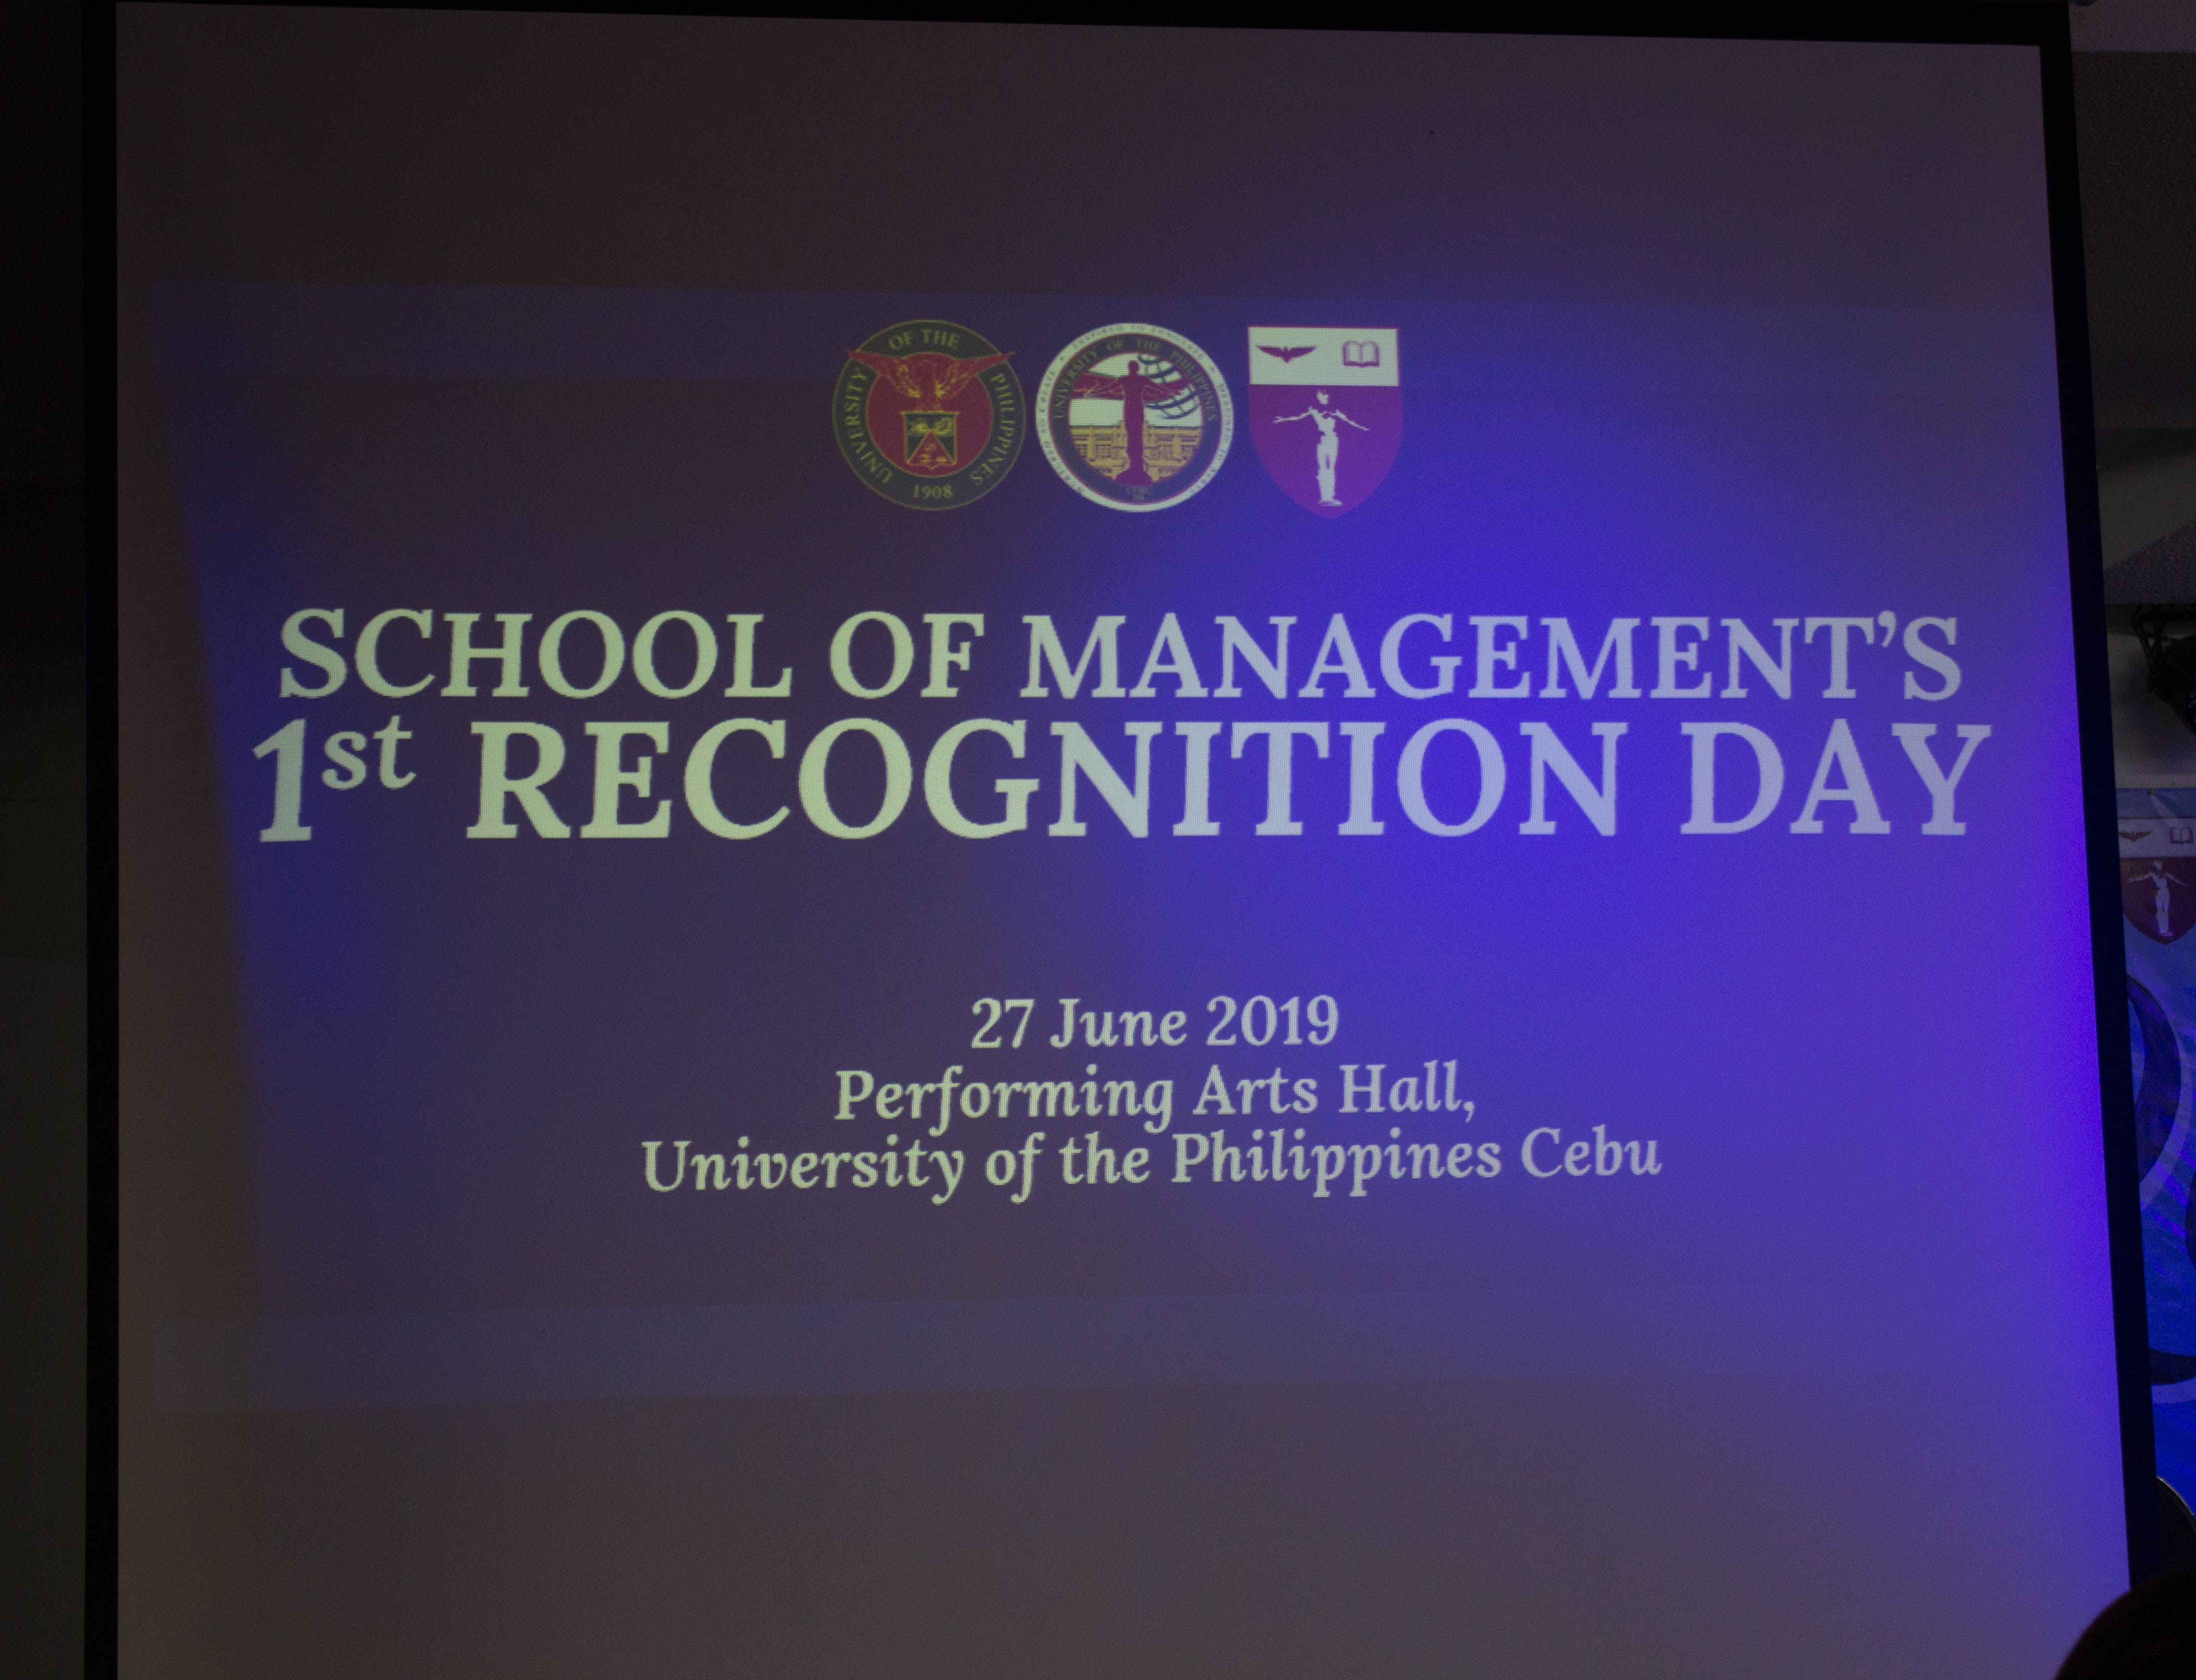 SoM’s 1st Recognition Day!